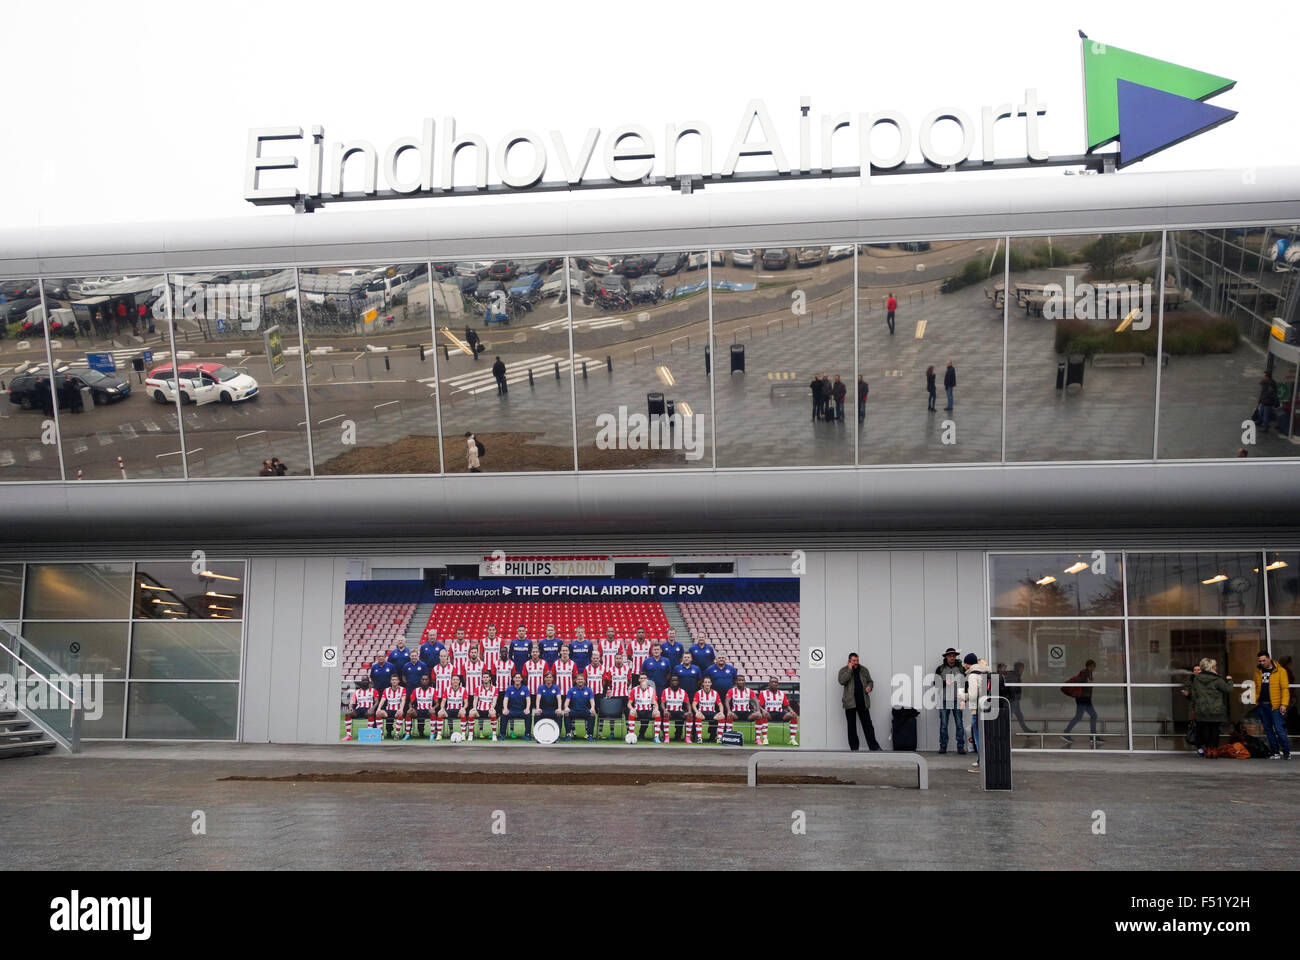 Airport Eindhoven with PSV football advertisement, North Brabant, Netherlands. Stock Photo